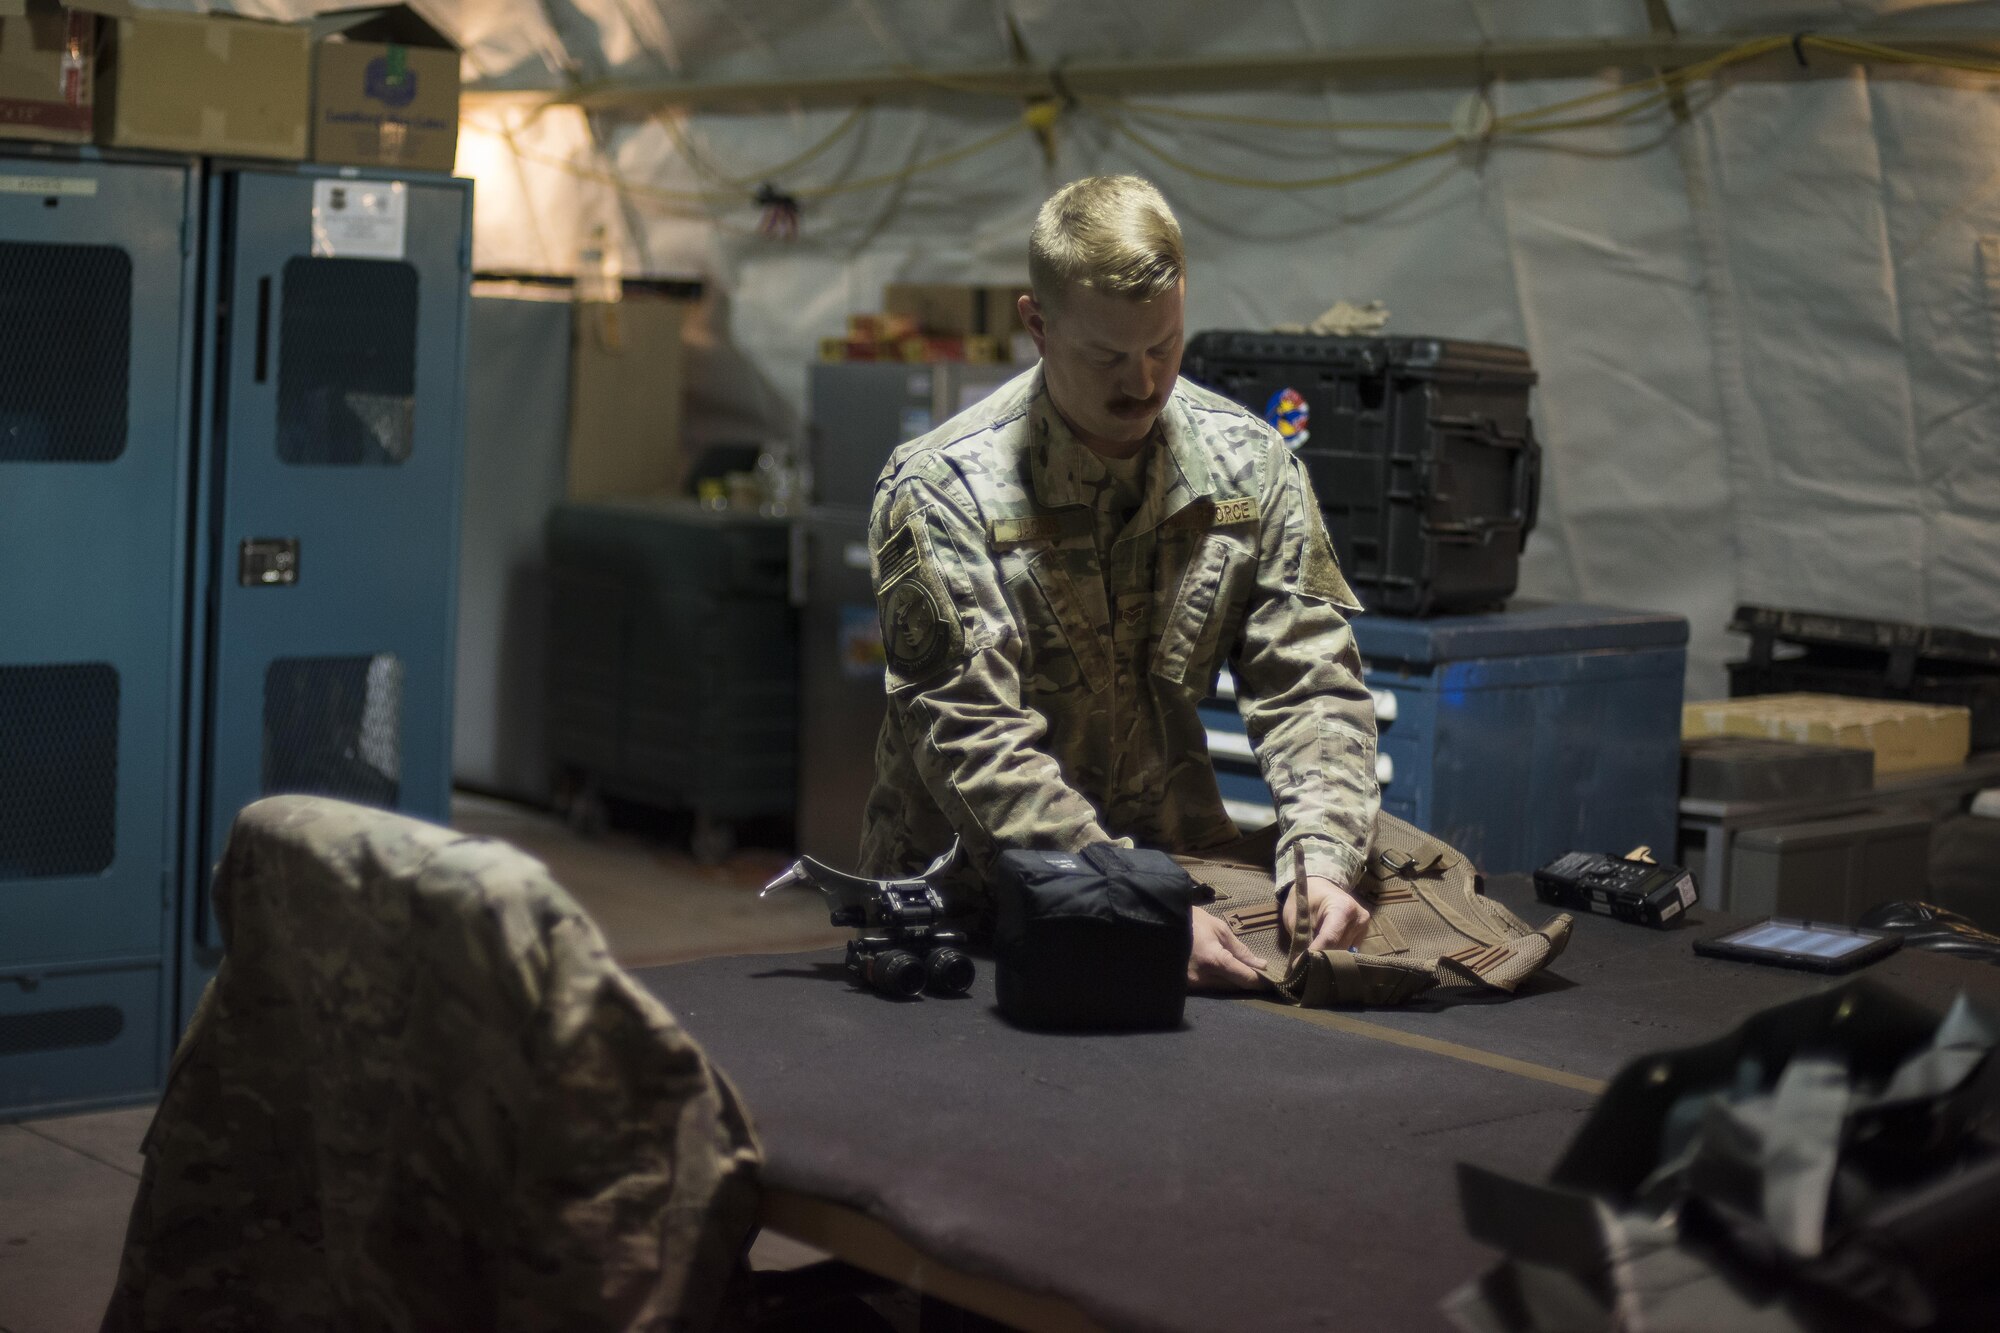 Senior Airman Aaron Jacobs, 332nd Aircrew Flight Equipment technician, inspects a survival vest June 12, 2017, in Southwest Asia. Members of AFE shop manage a variety of gear including helmets, G-suits and night vision goggles. (U.S. Air Force photo/Senior Airman Damon Kasberg)